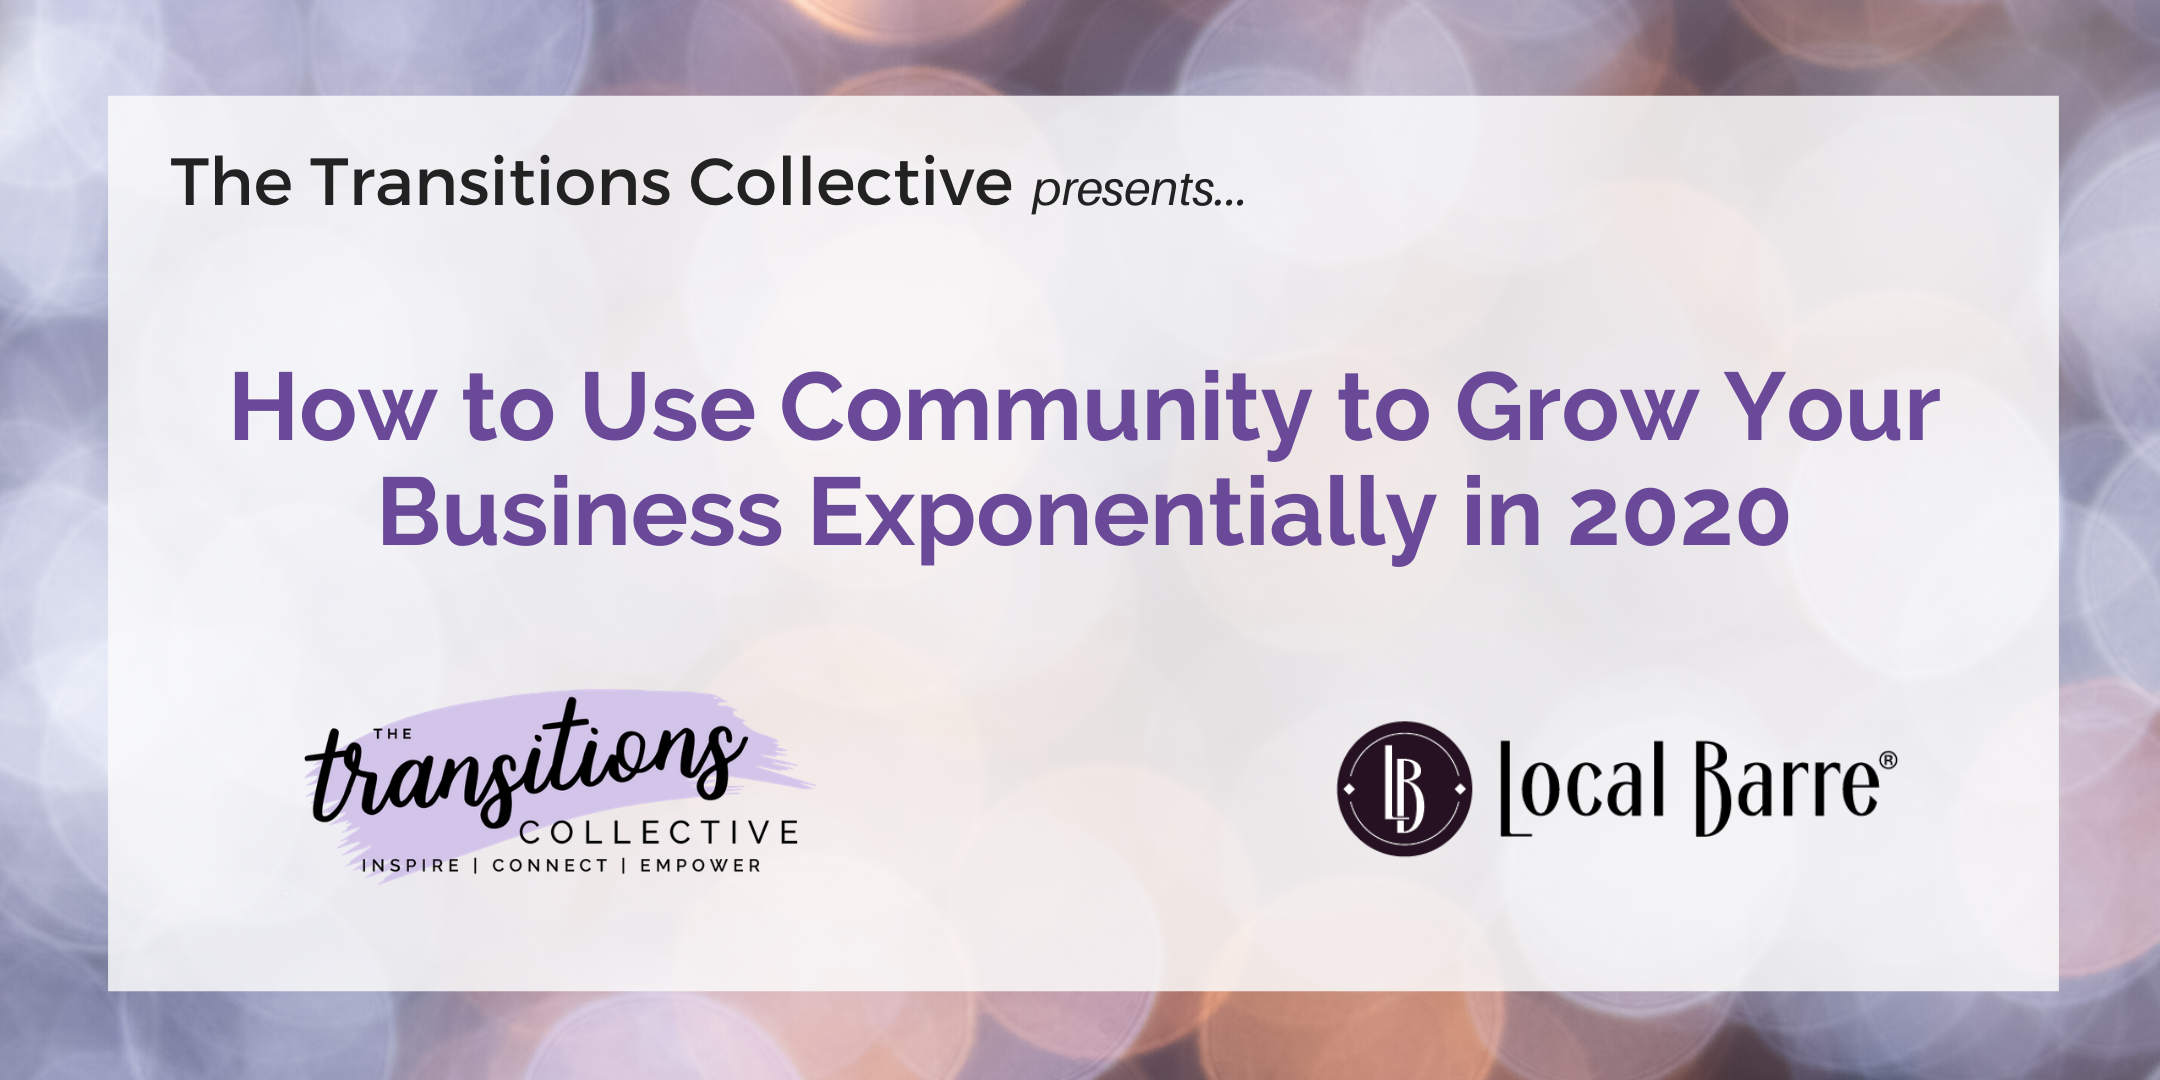 How to Use Community to Grow Your Business Exponentially in 2020